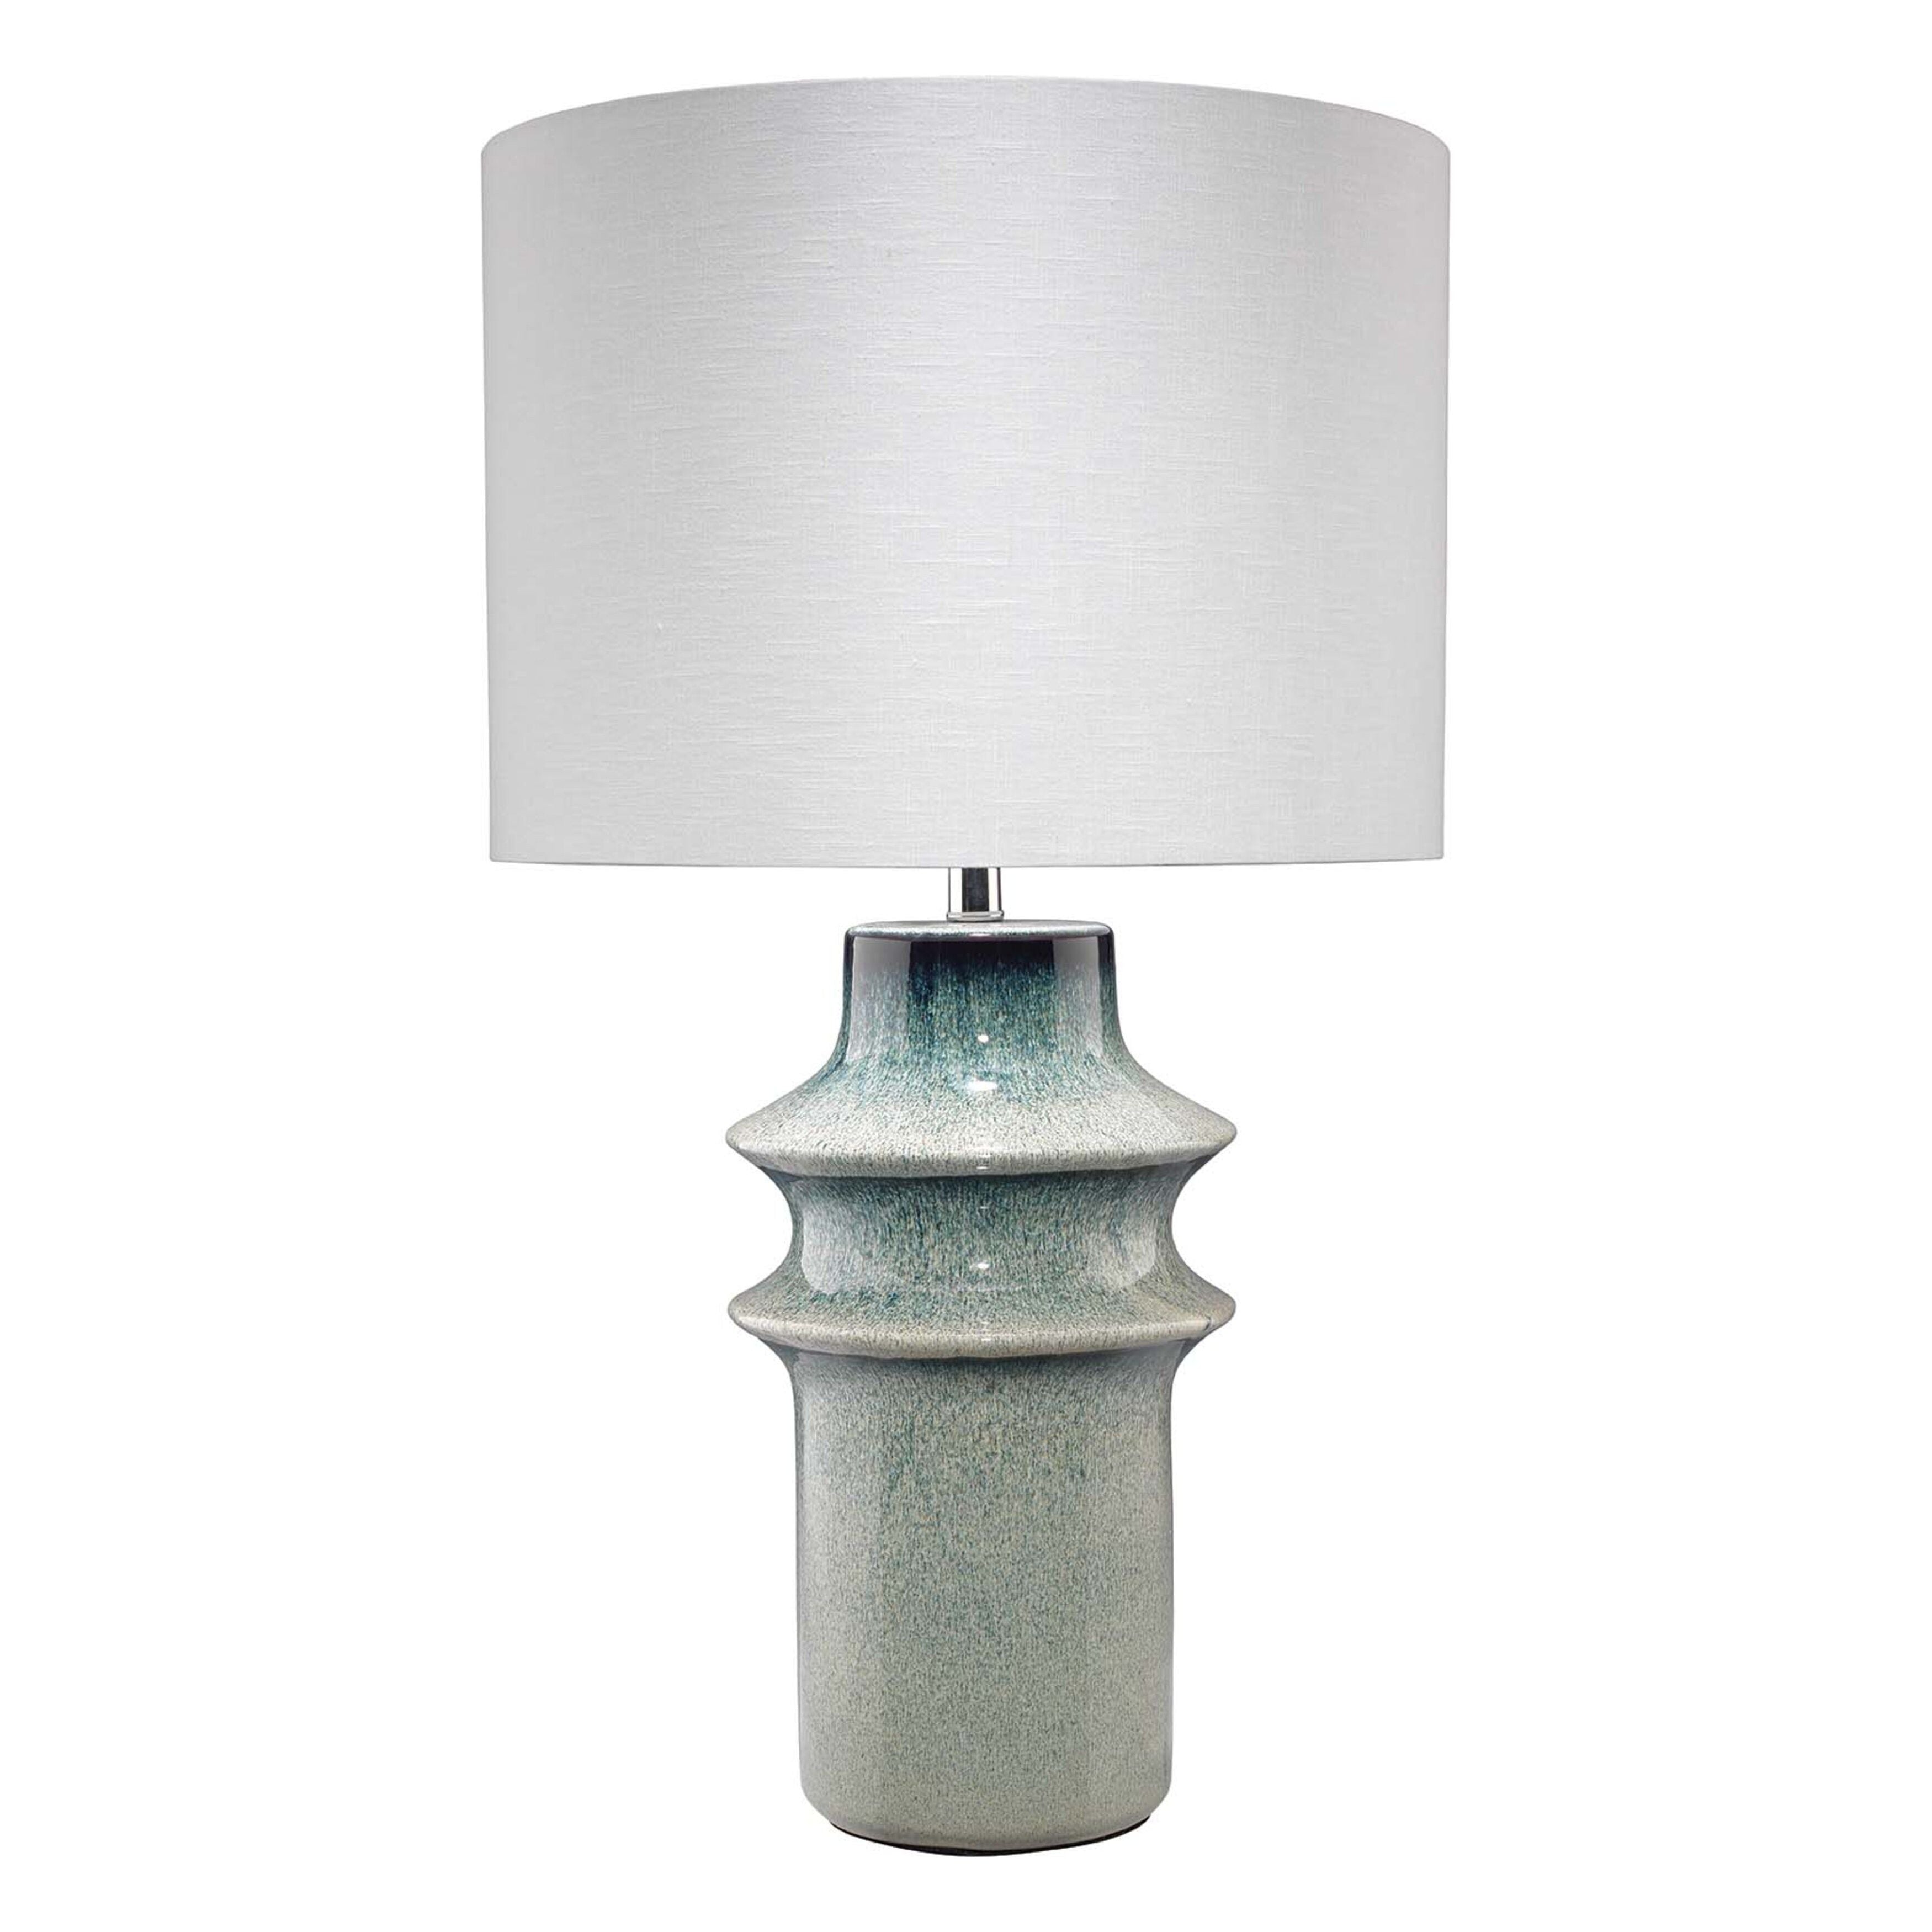 Jamie Young Company - 9CYMBTLBLUE - Cymbals Table Lamp - Cymbals - Blue